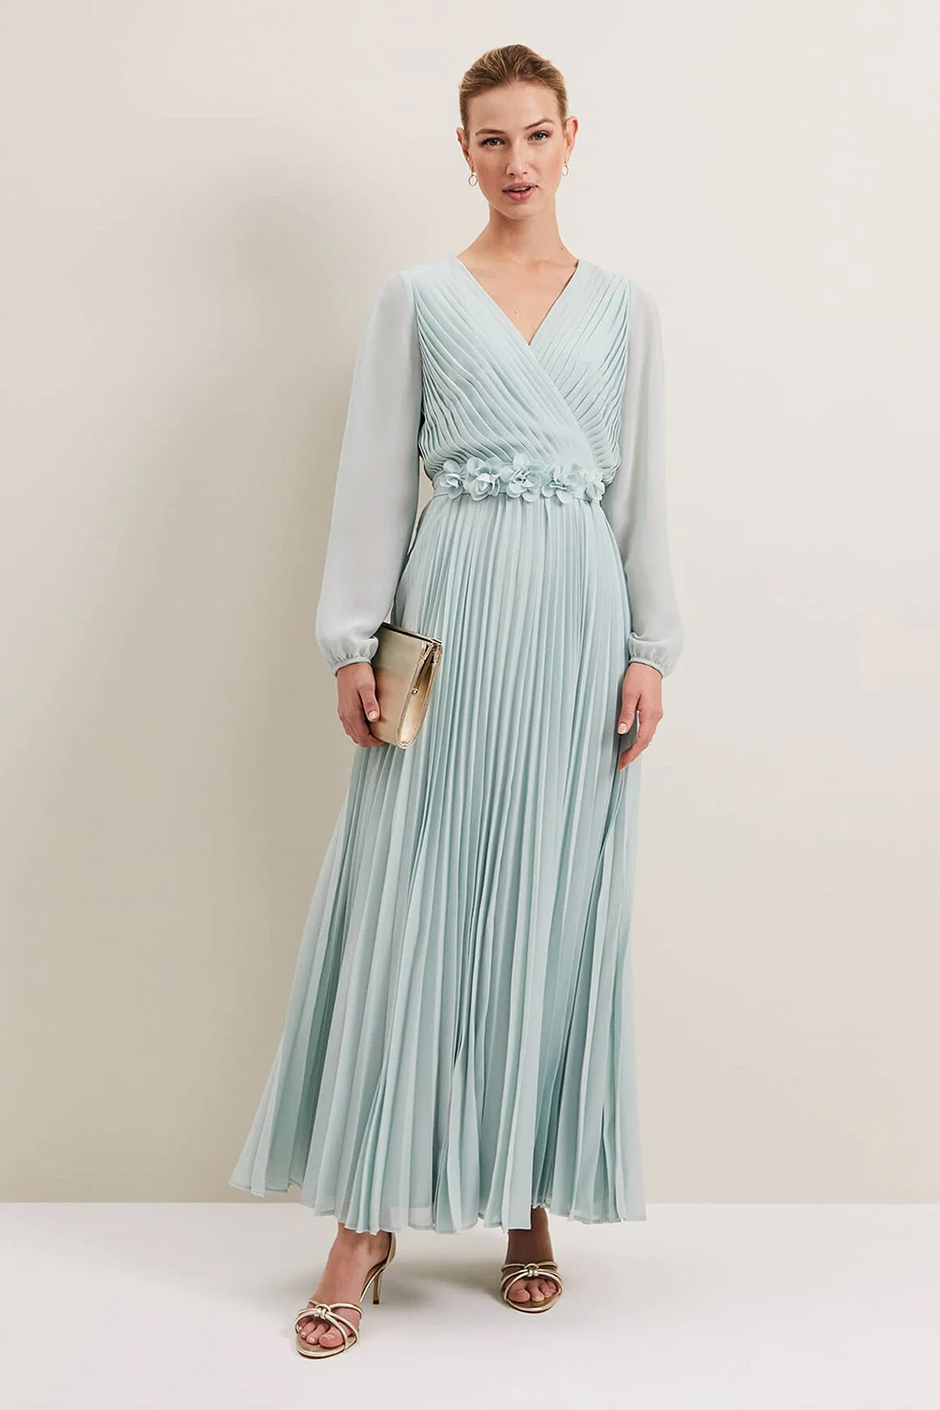 Spring bridesmaid dress from Phase Eight - pale blue pleated maxi dress with sheer sleeves and floral applique belt